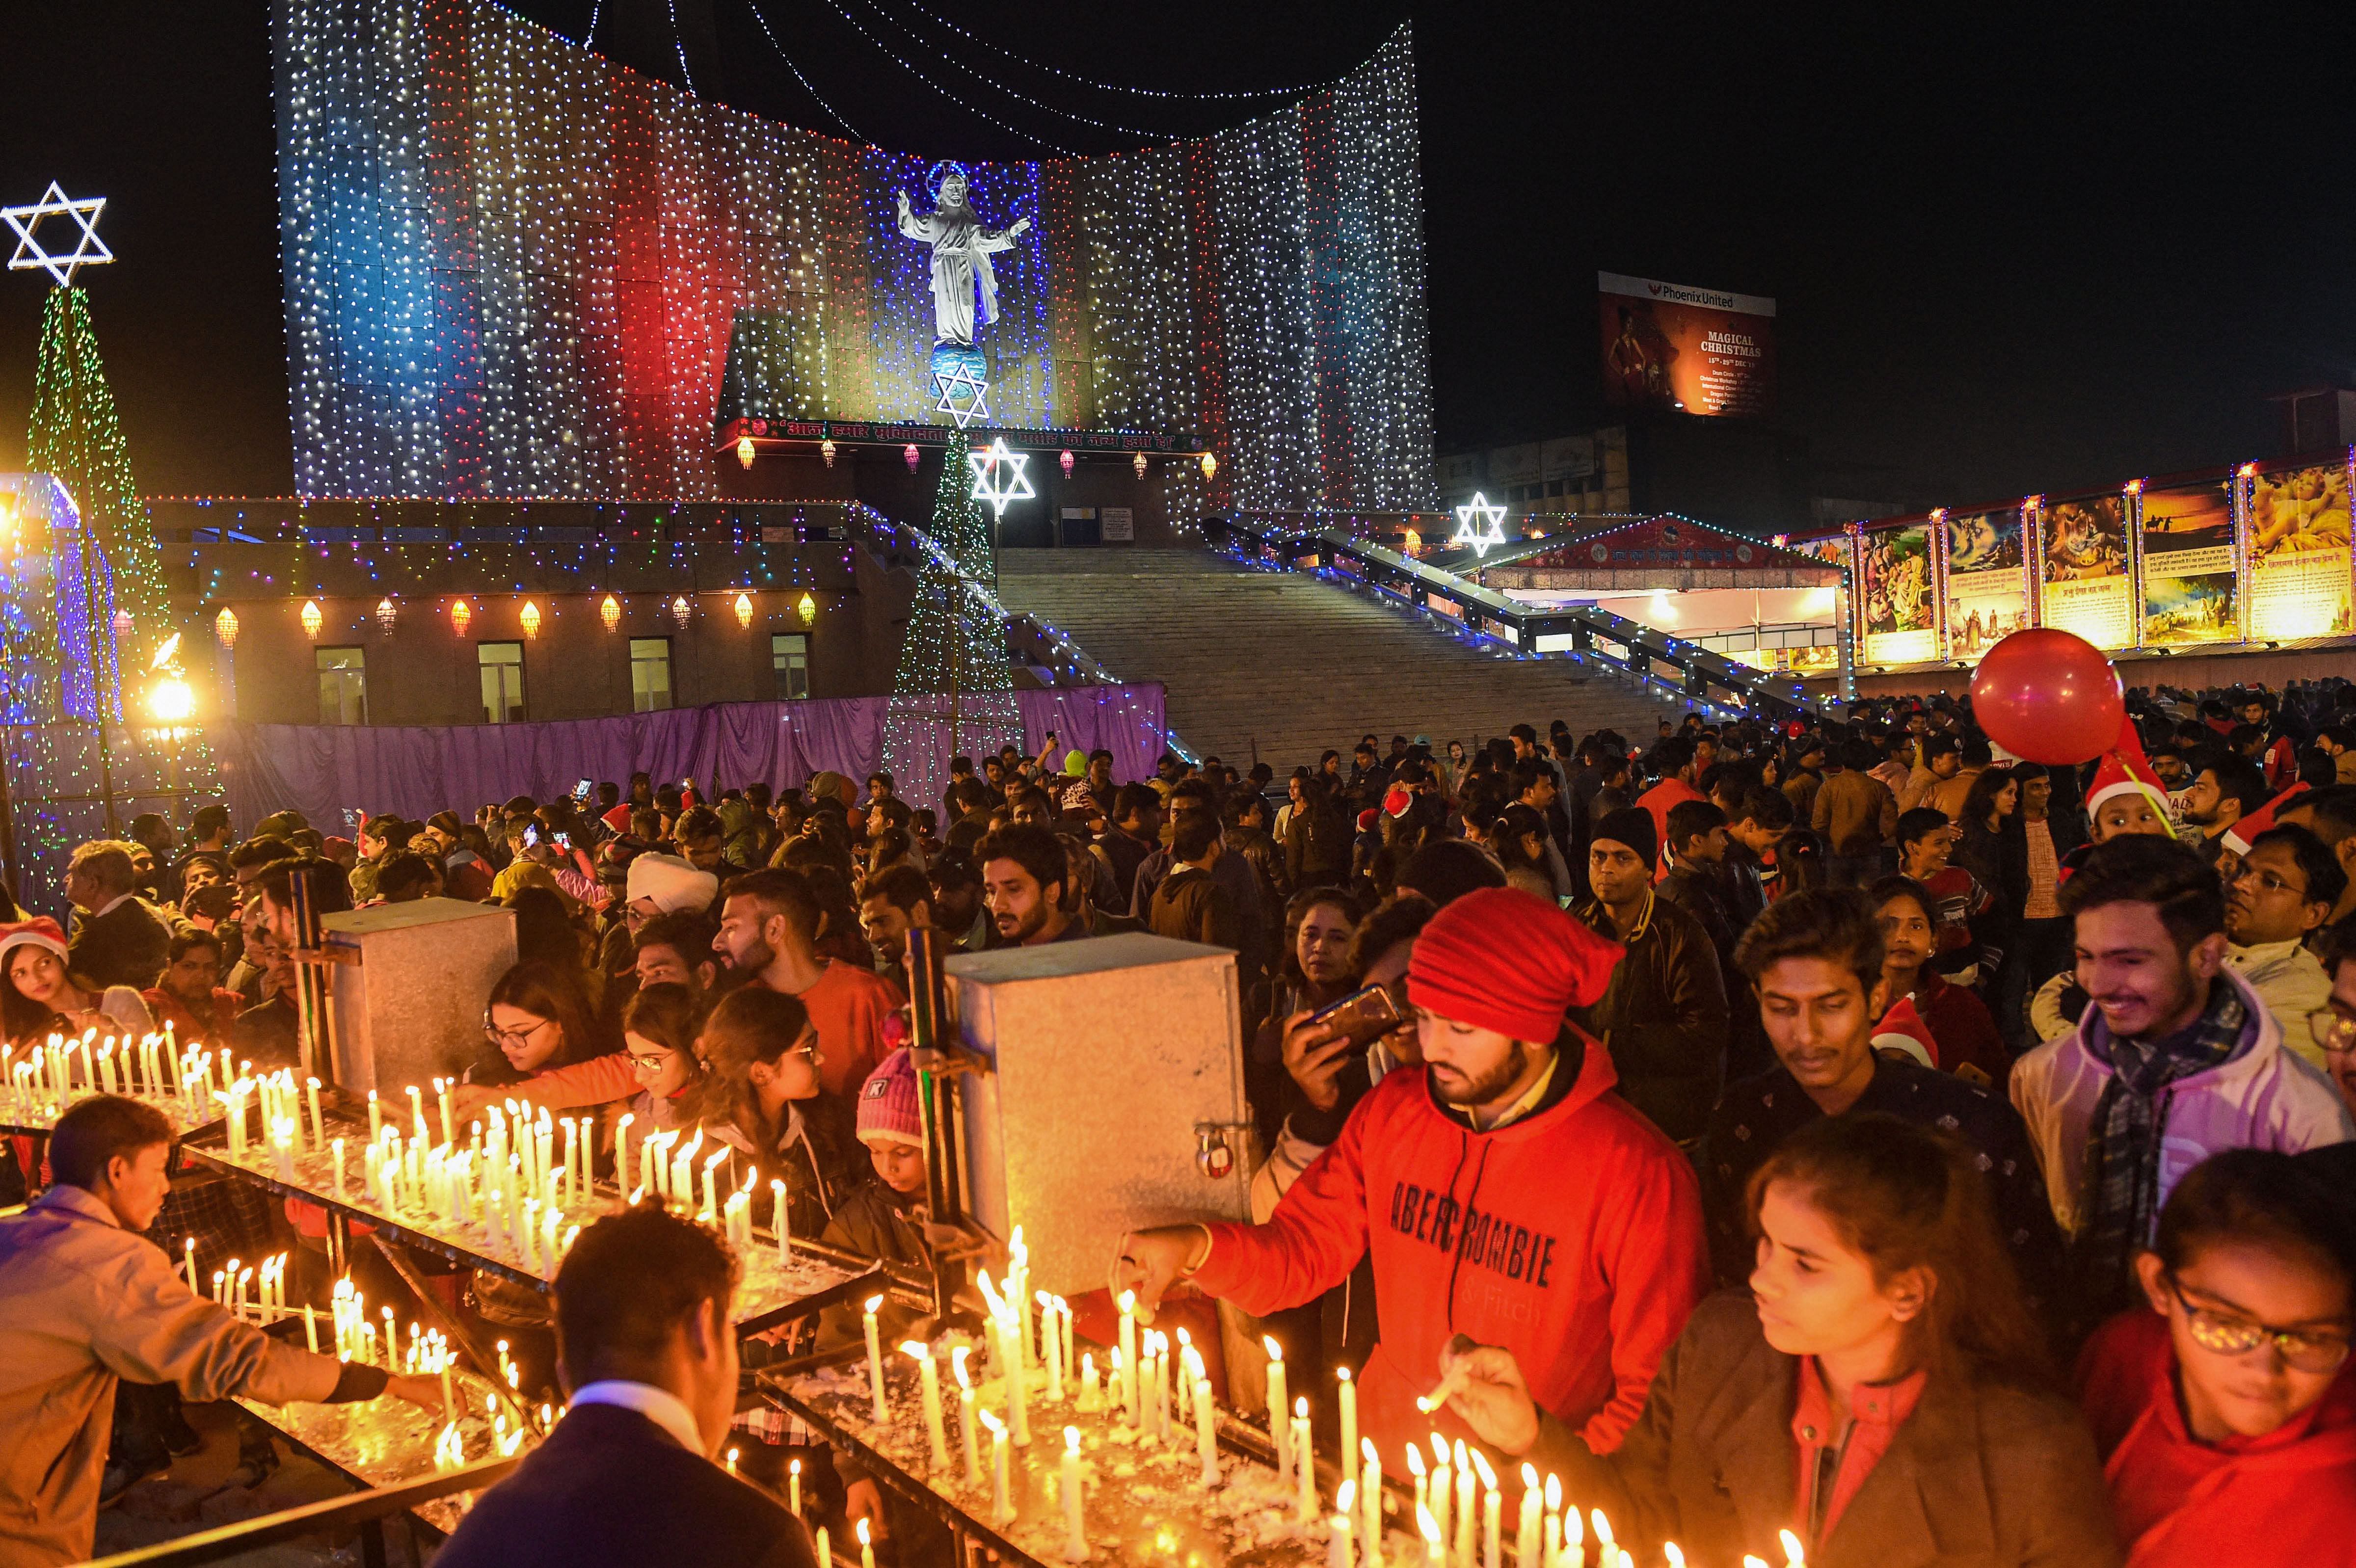  Devotees offer prayers at the St. Cathedral Church on the occasion of Christmas in Lucknow. (PTI Photo)